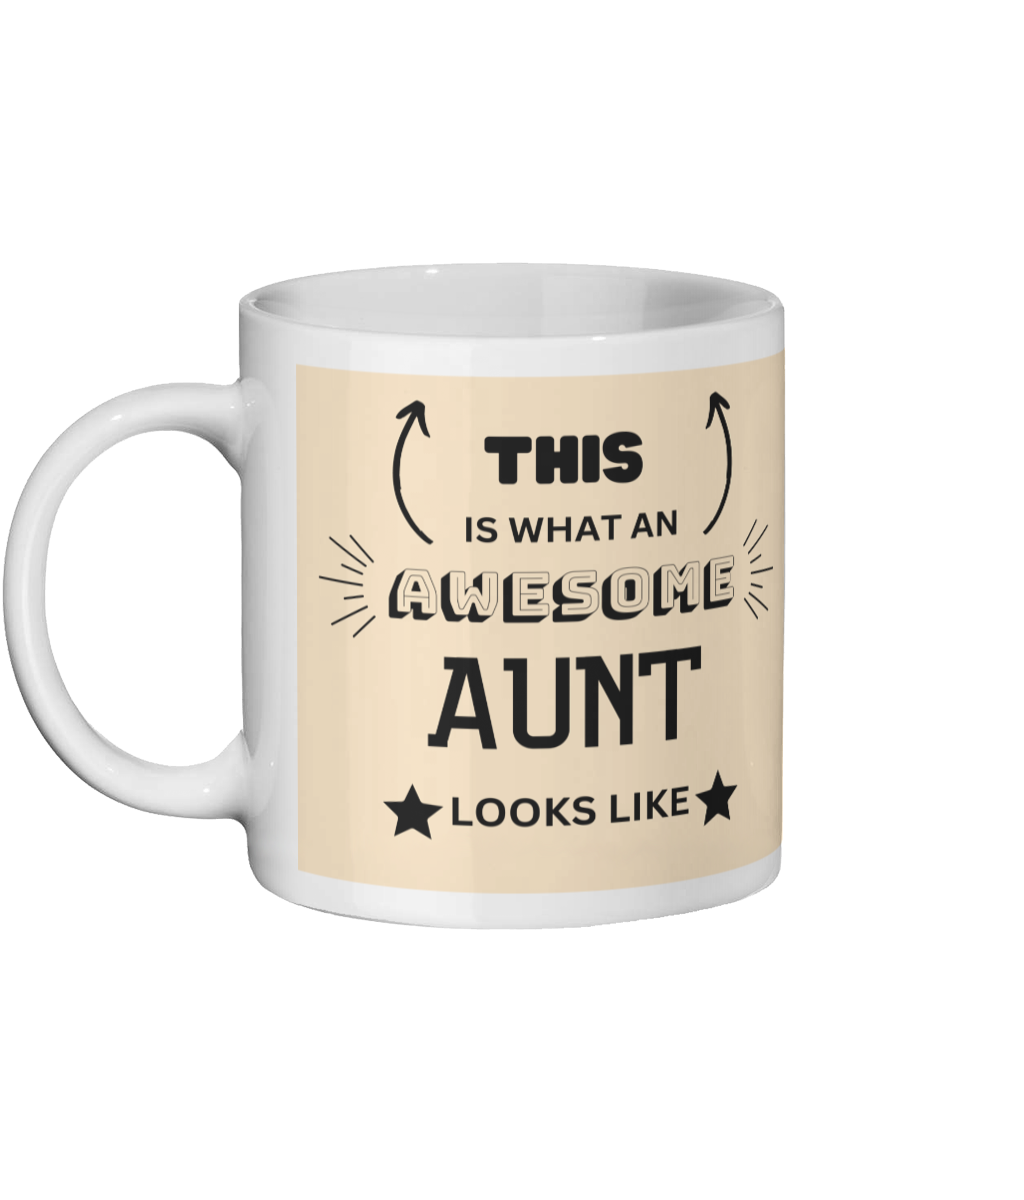 Auntie Mug, This Is What An Awesome Aunt Looks Like Mug for Aunt for Gifts